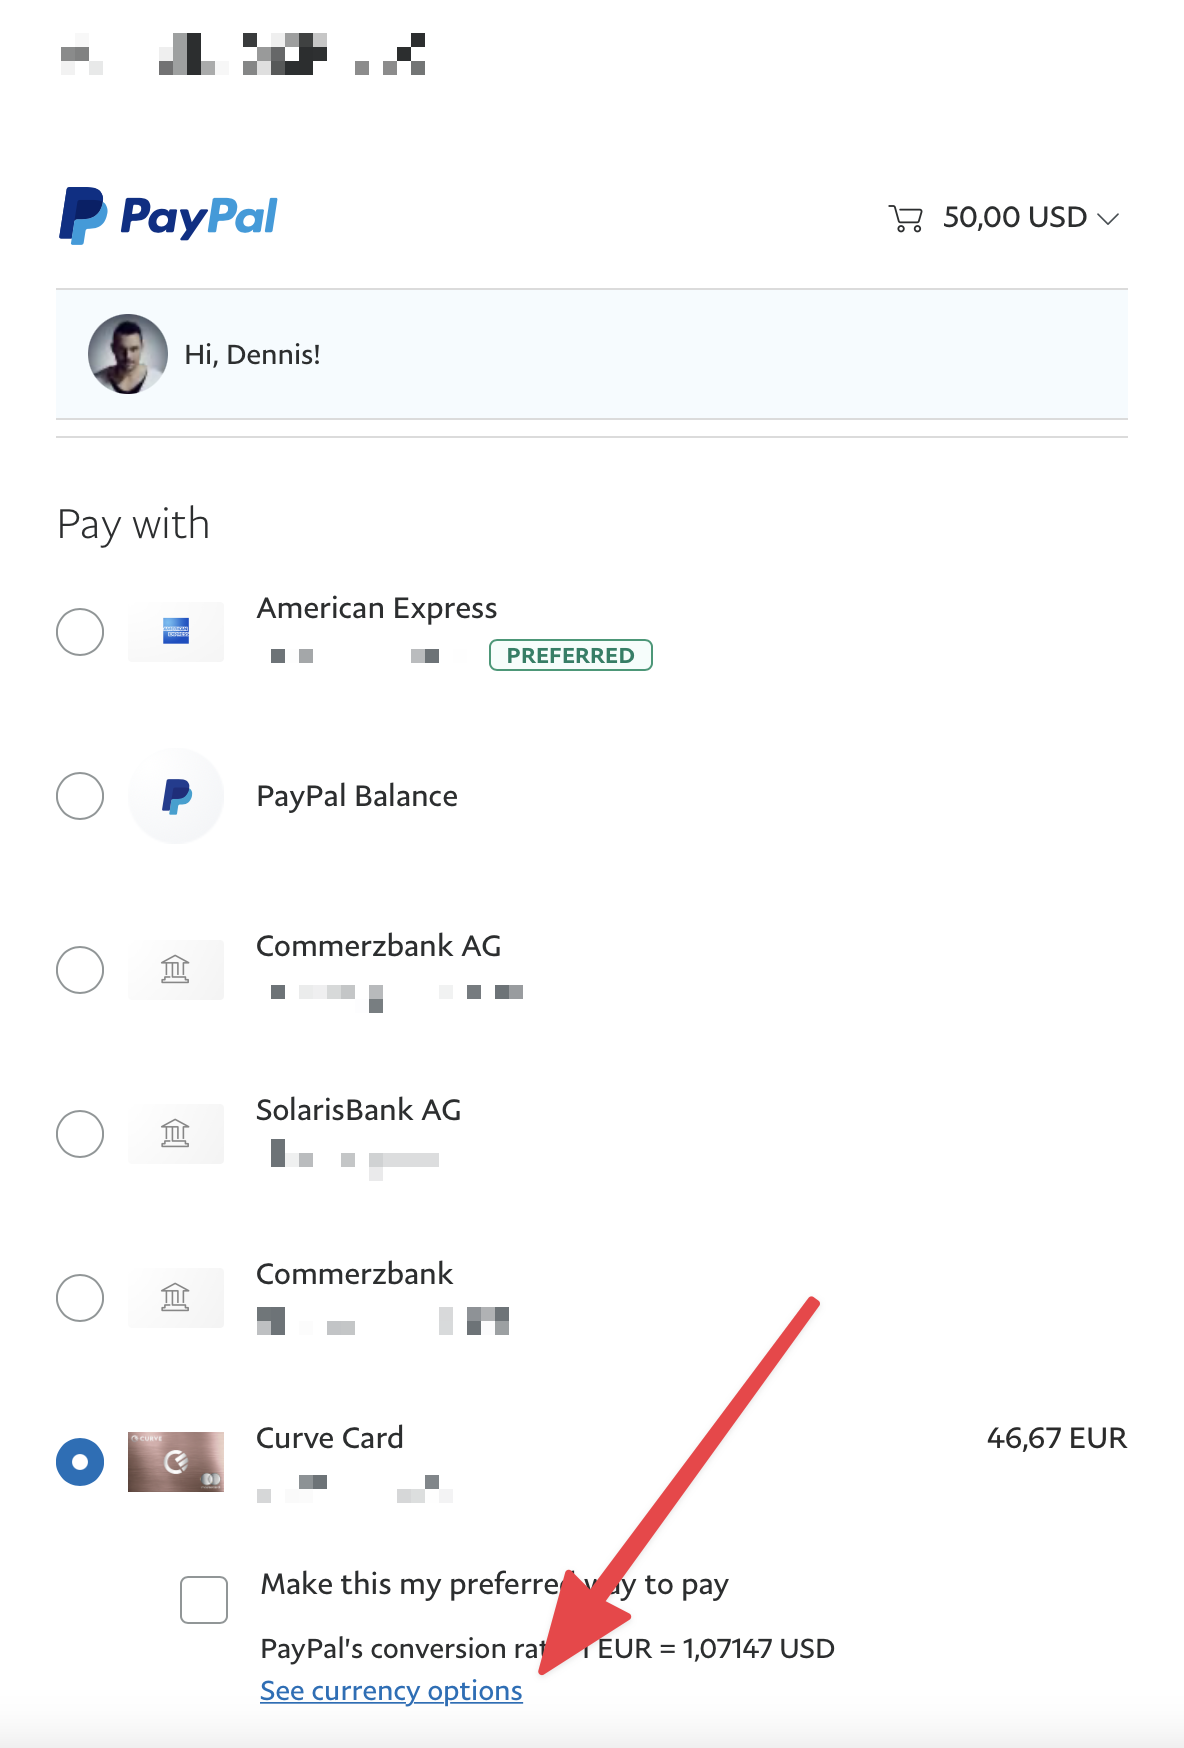 How To Avoid PayPal Currency Conversion Fees